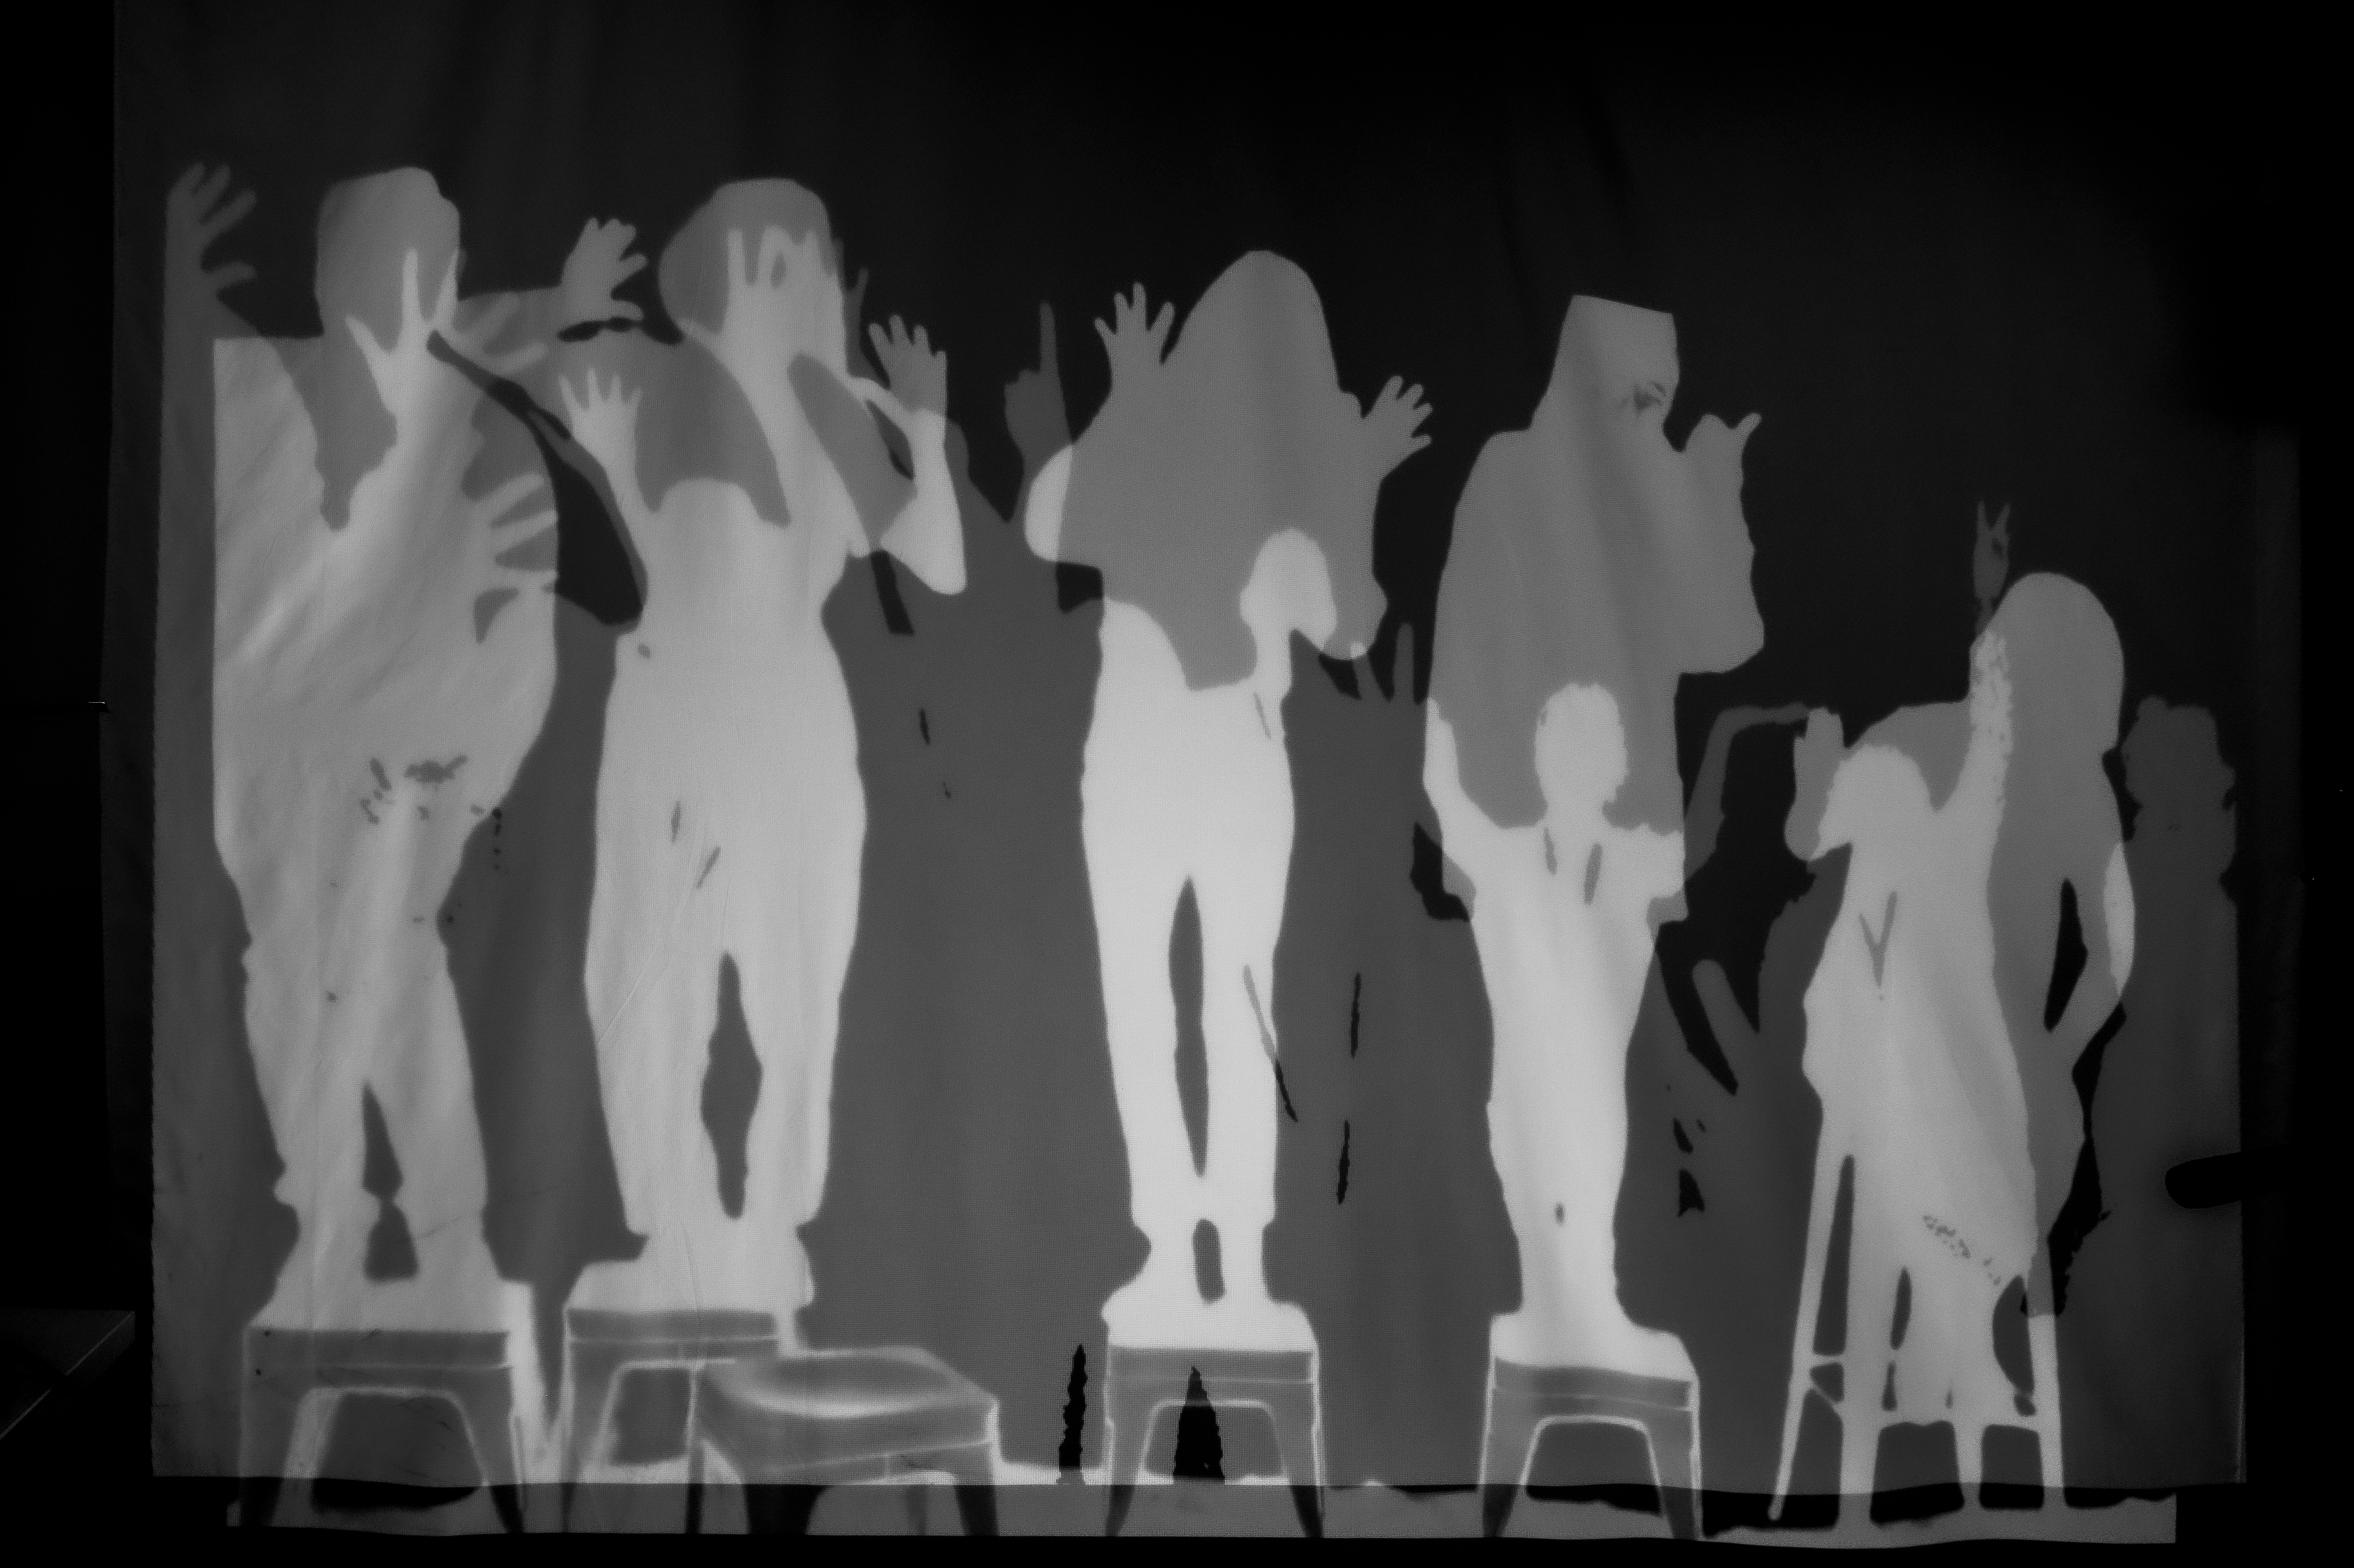 white silhouettes of two groups of people superimposed like shadows on a wall